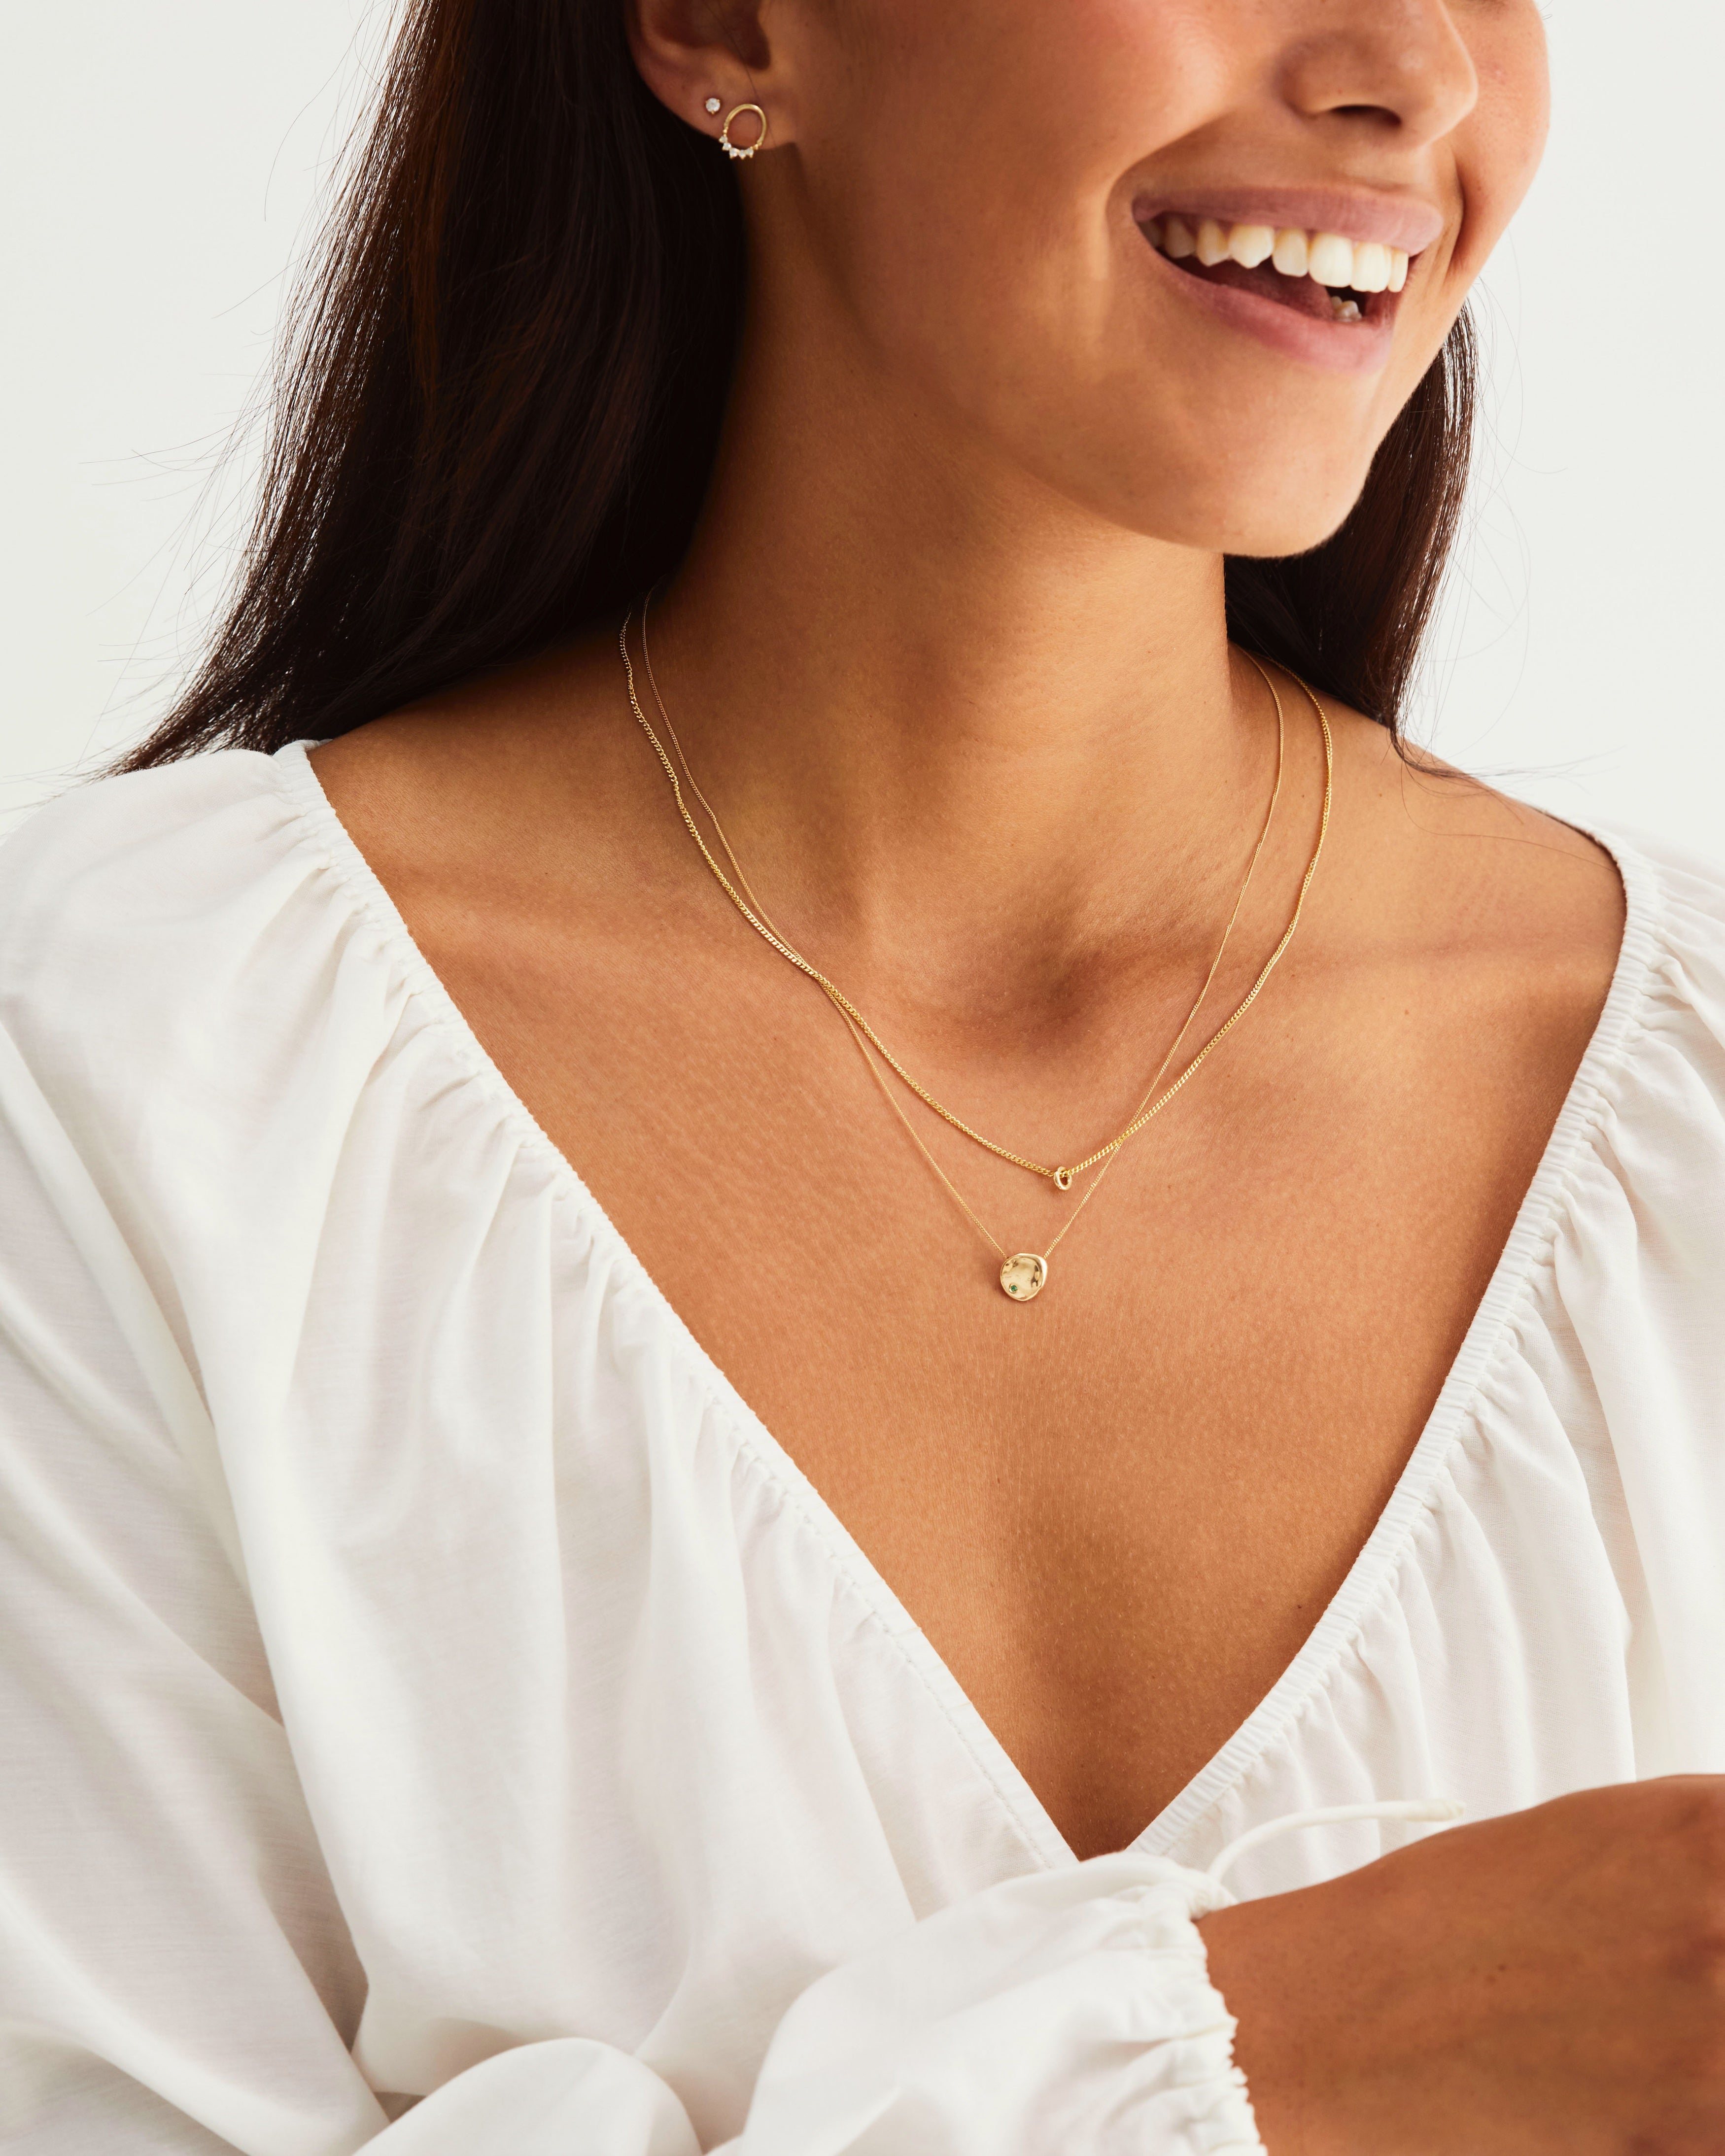 A woman wearing the Petite Mana Necklace and the Aether Necklace, both in yellow gold.